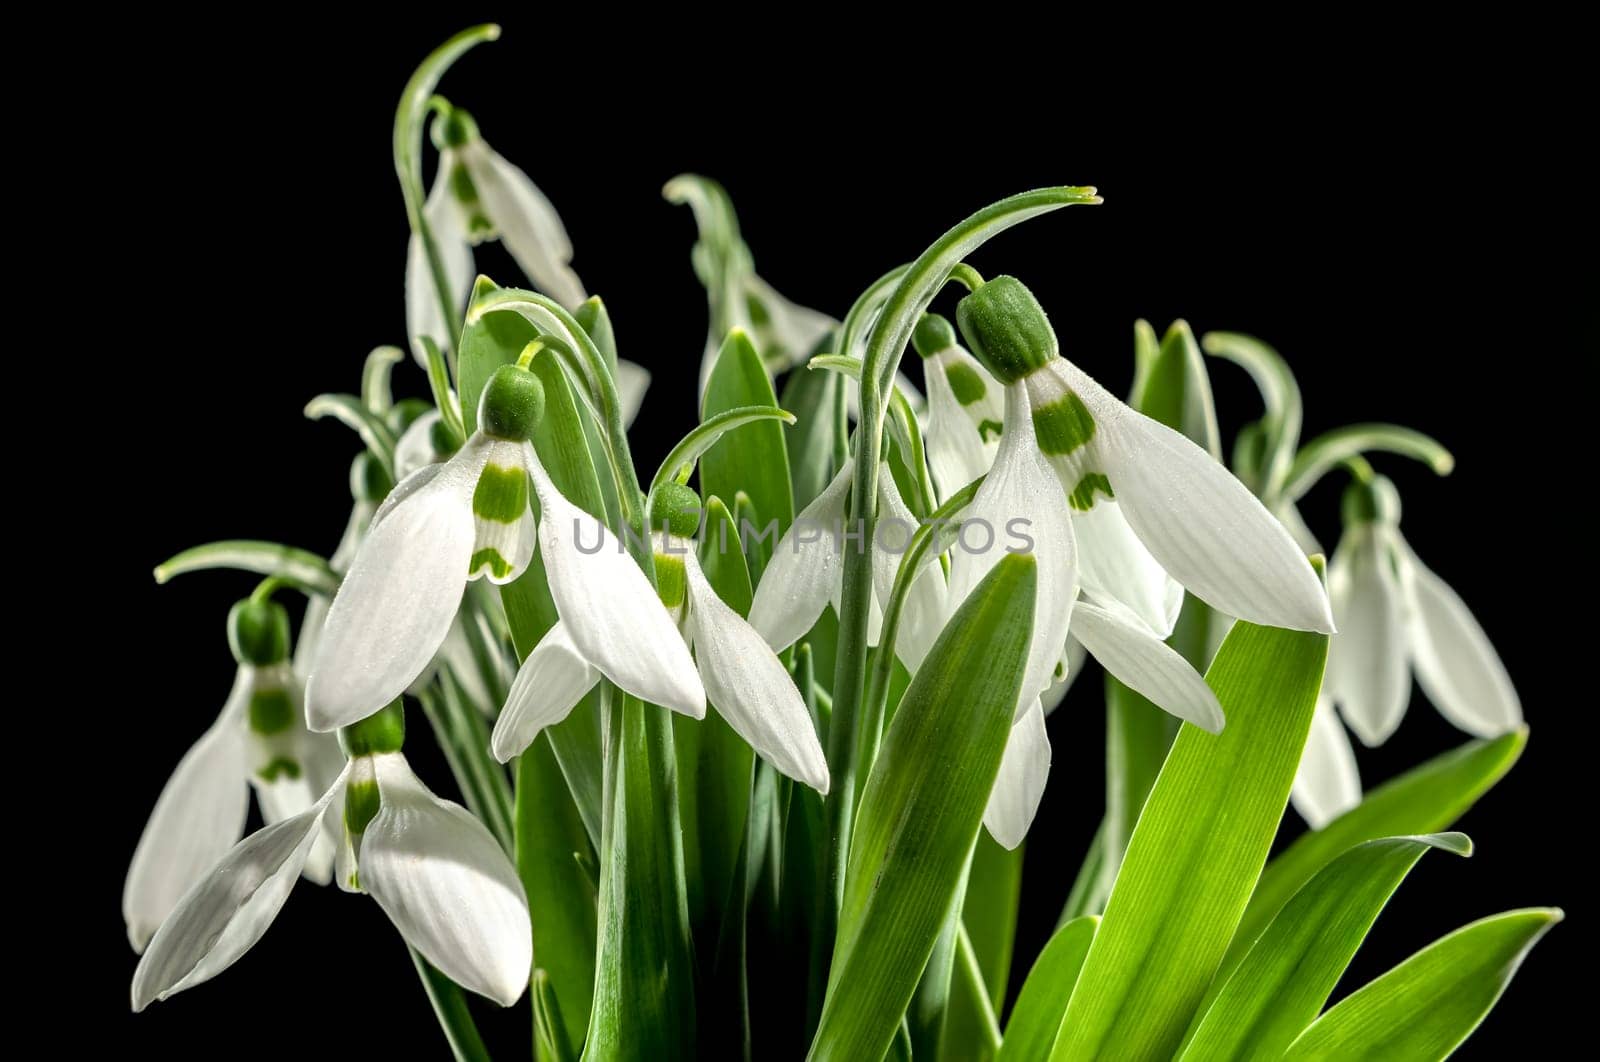 White Galanthus flowers on a black background by Multipedia